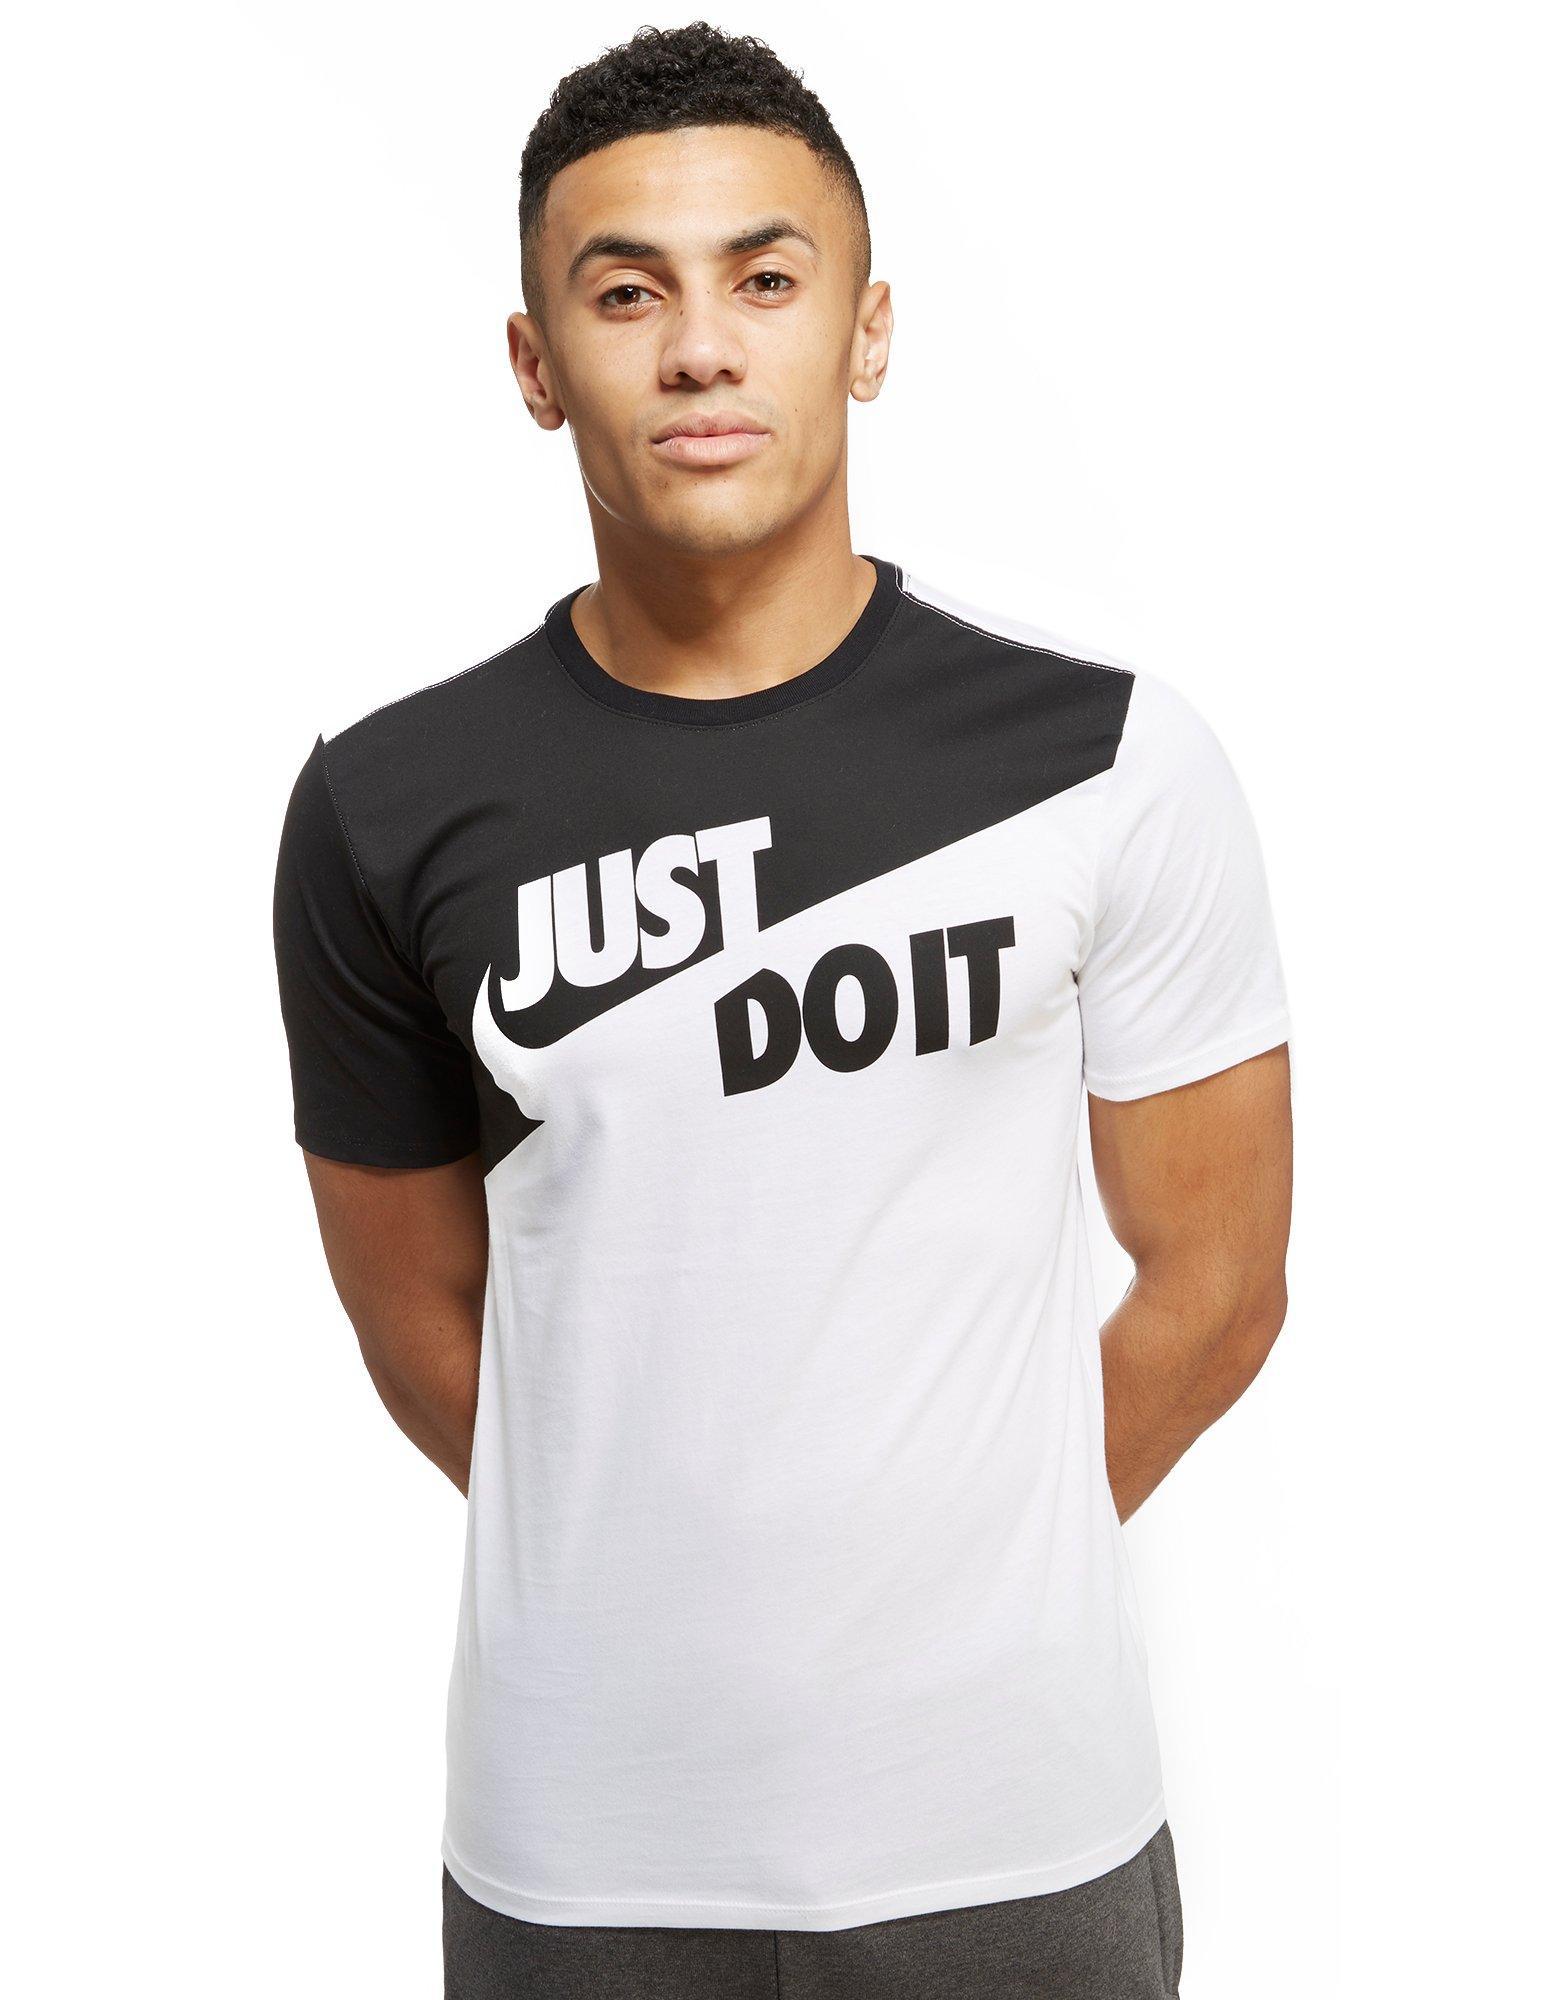 black and white just do it shirt